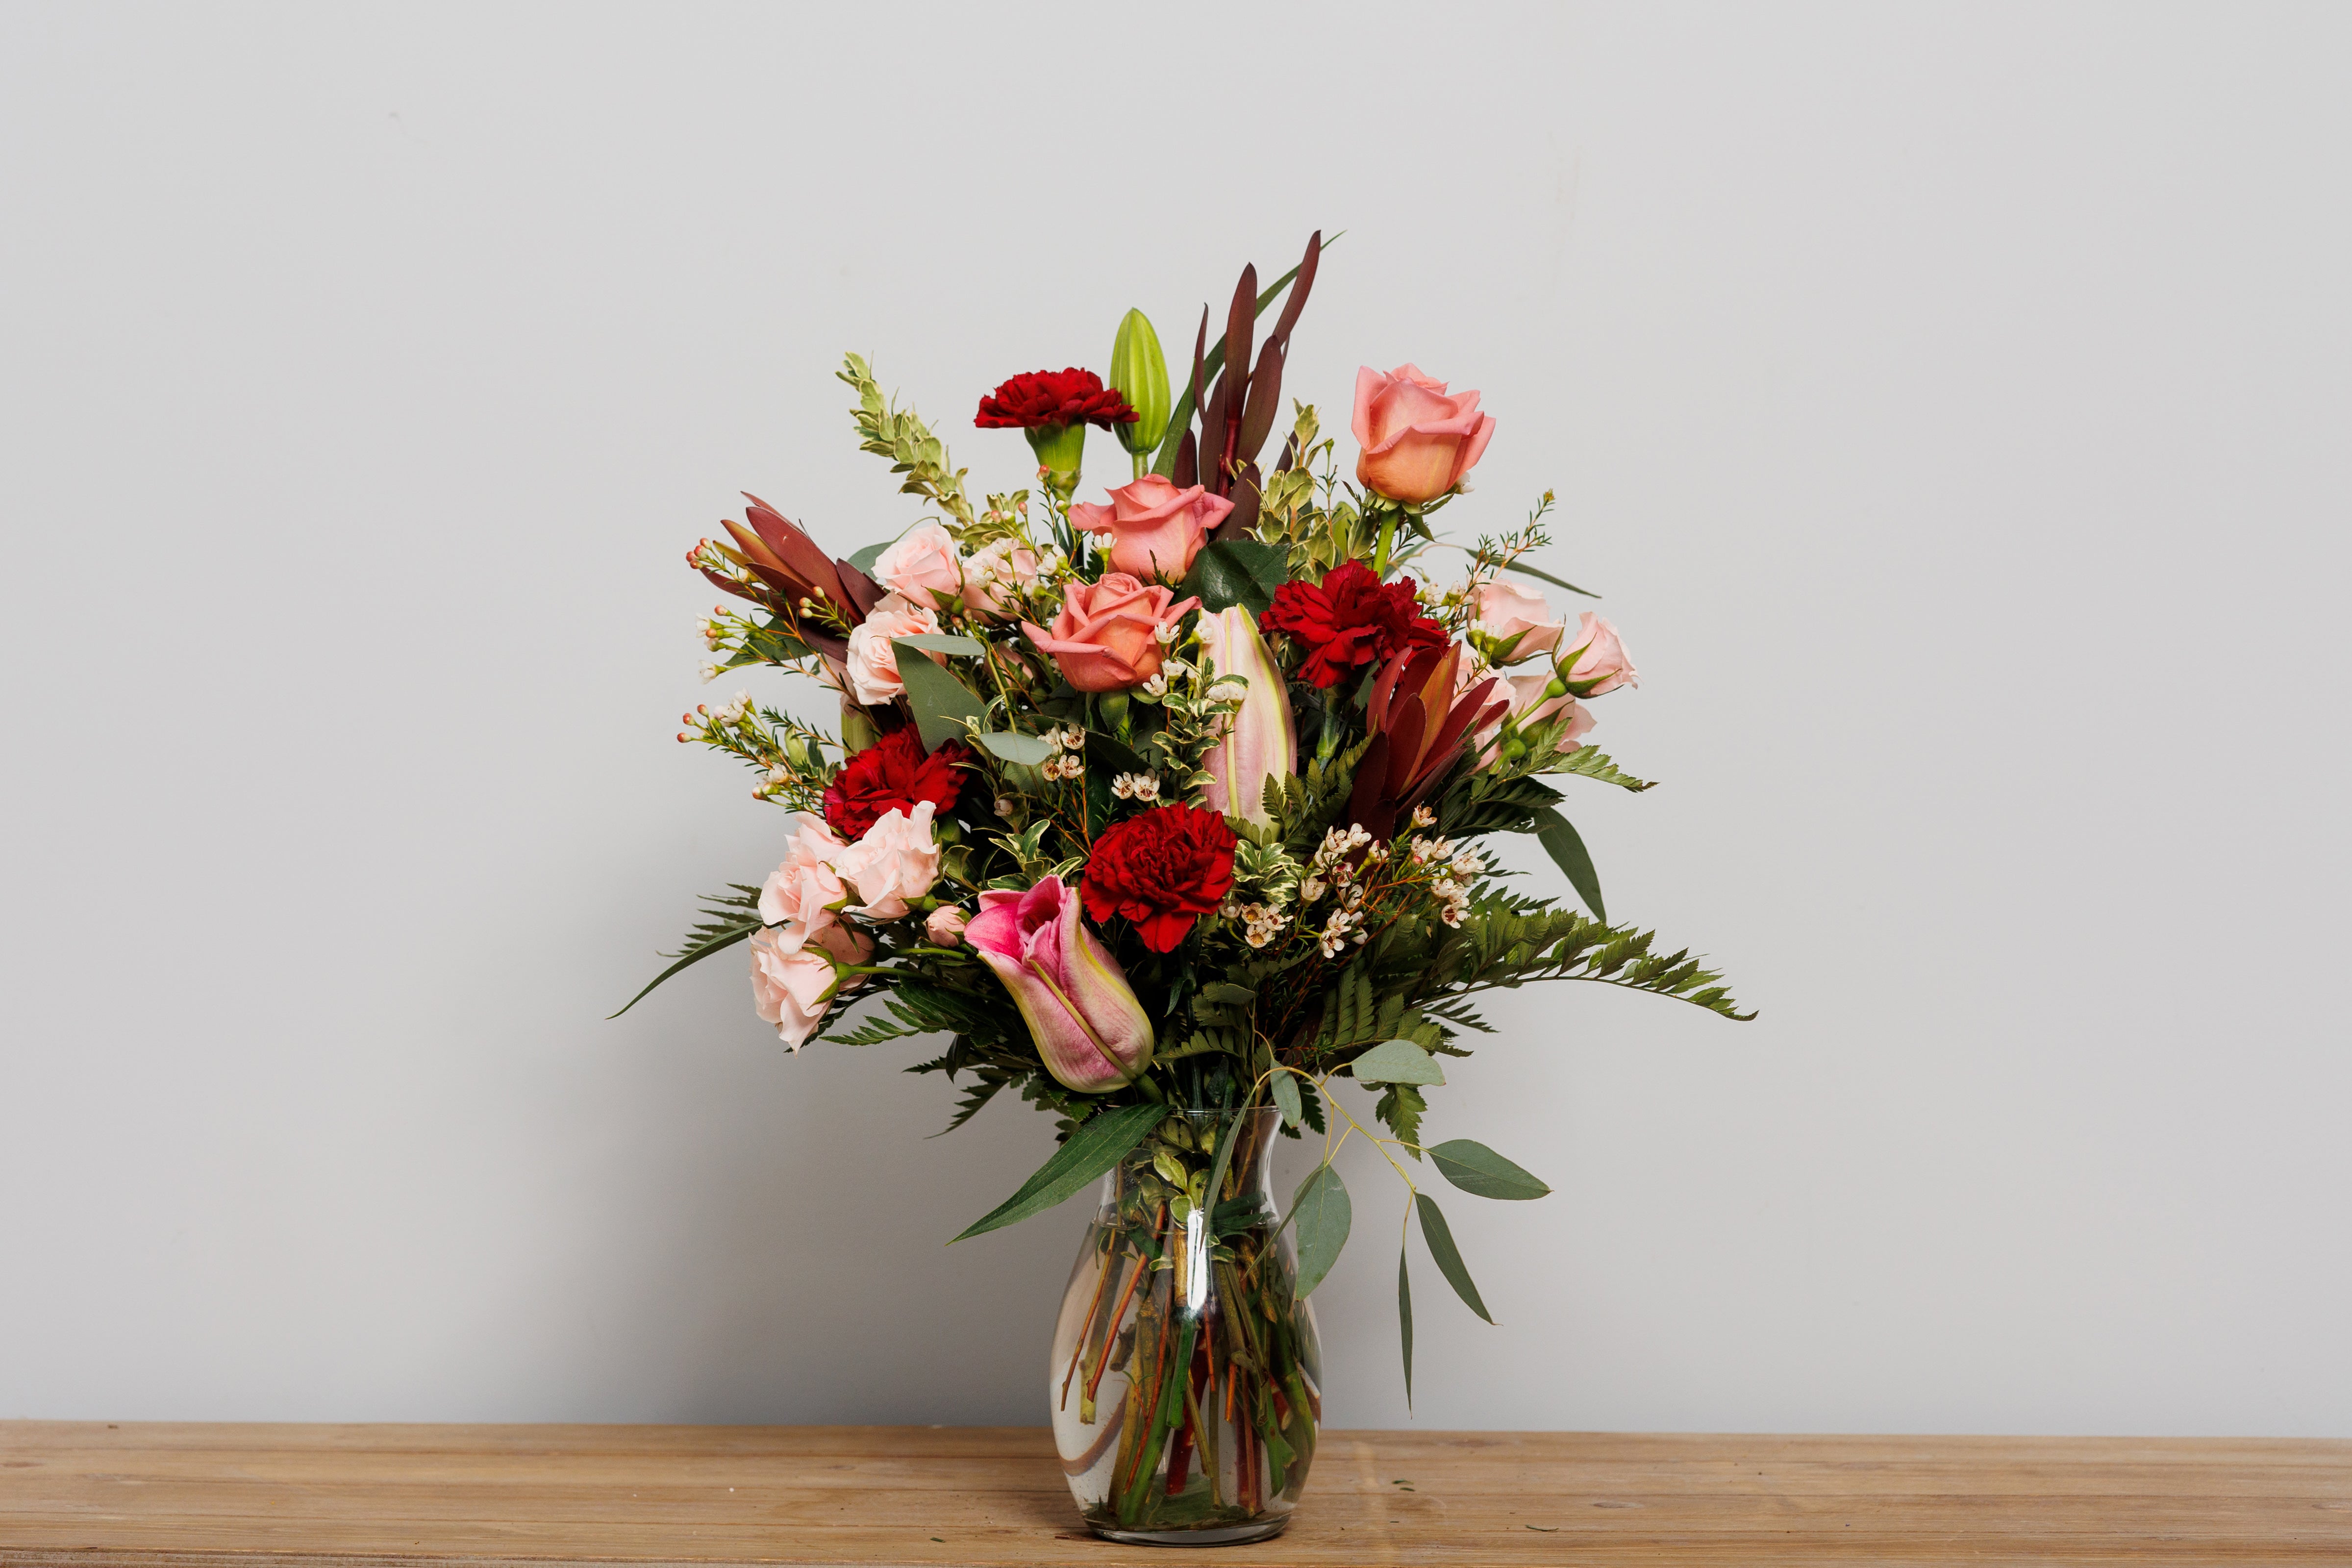 A vase arrangement with dark red carnations, pink lilies and pink roses.